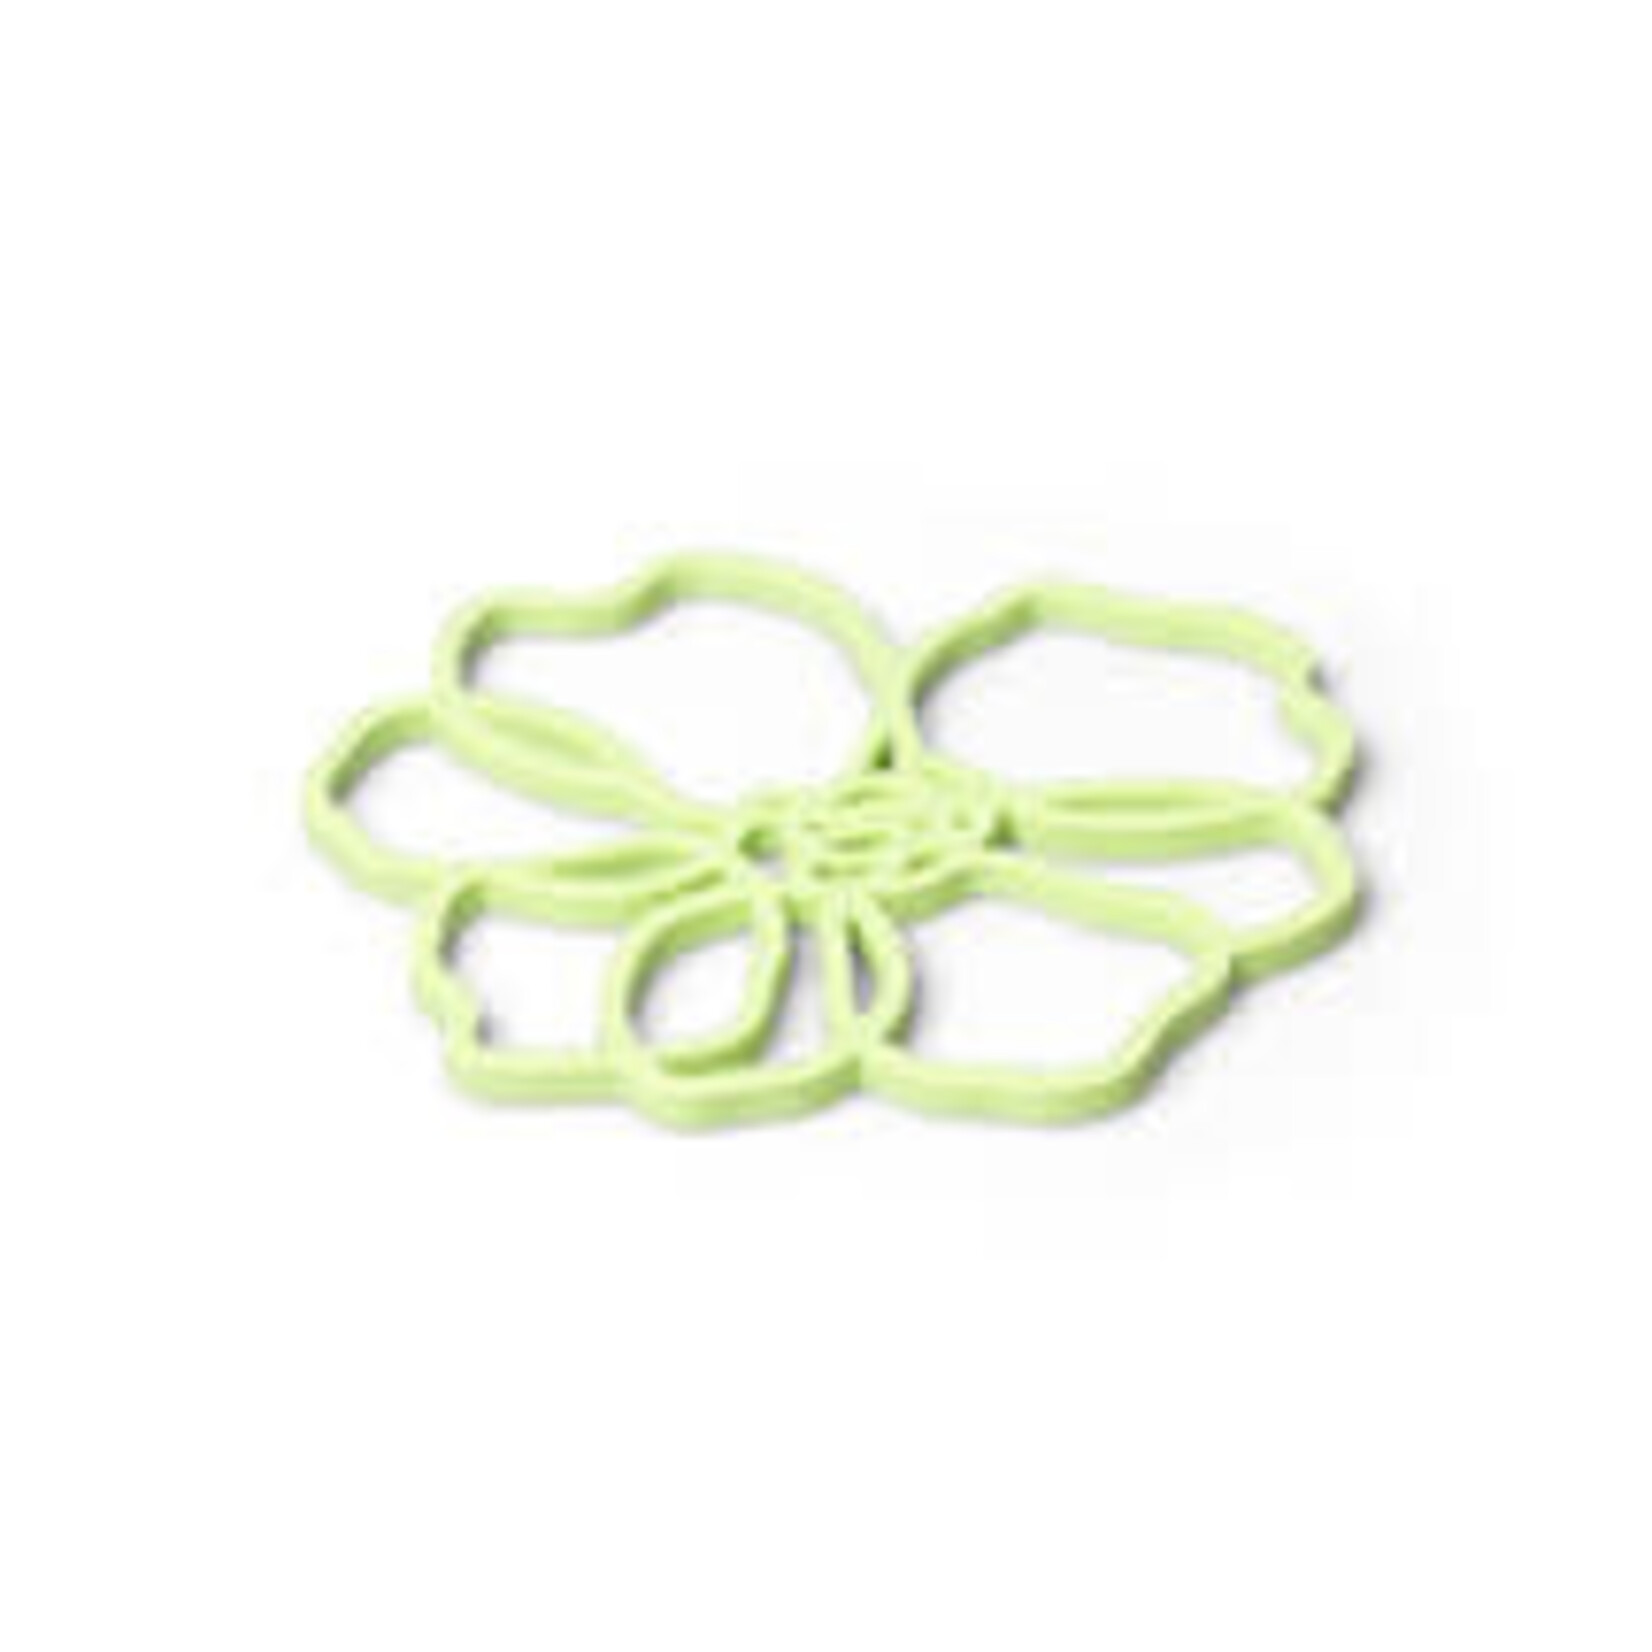 Tools2cook Flower Anemone Green pannenonderzetter Tools2cook Anemone Green onderzetter 2000508